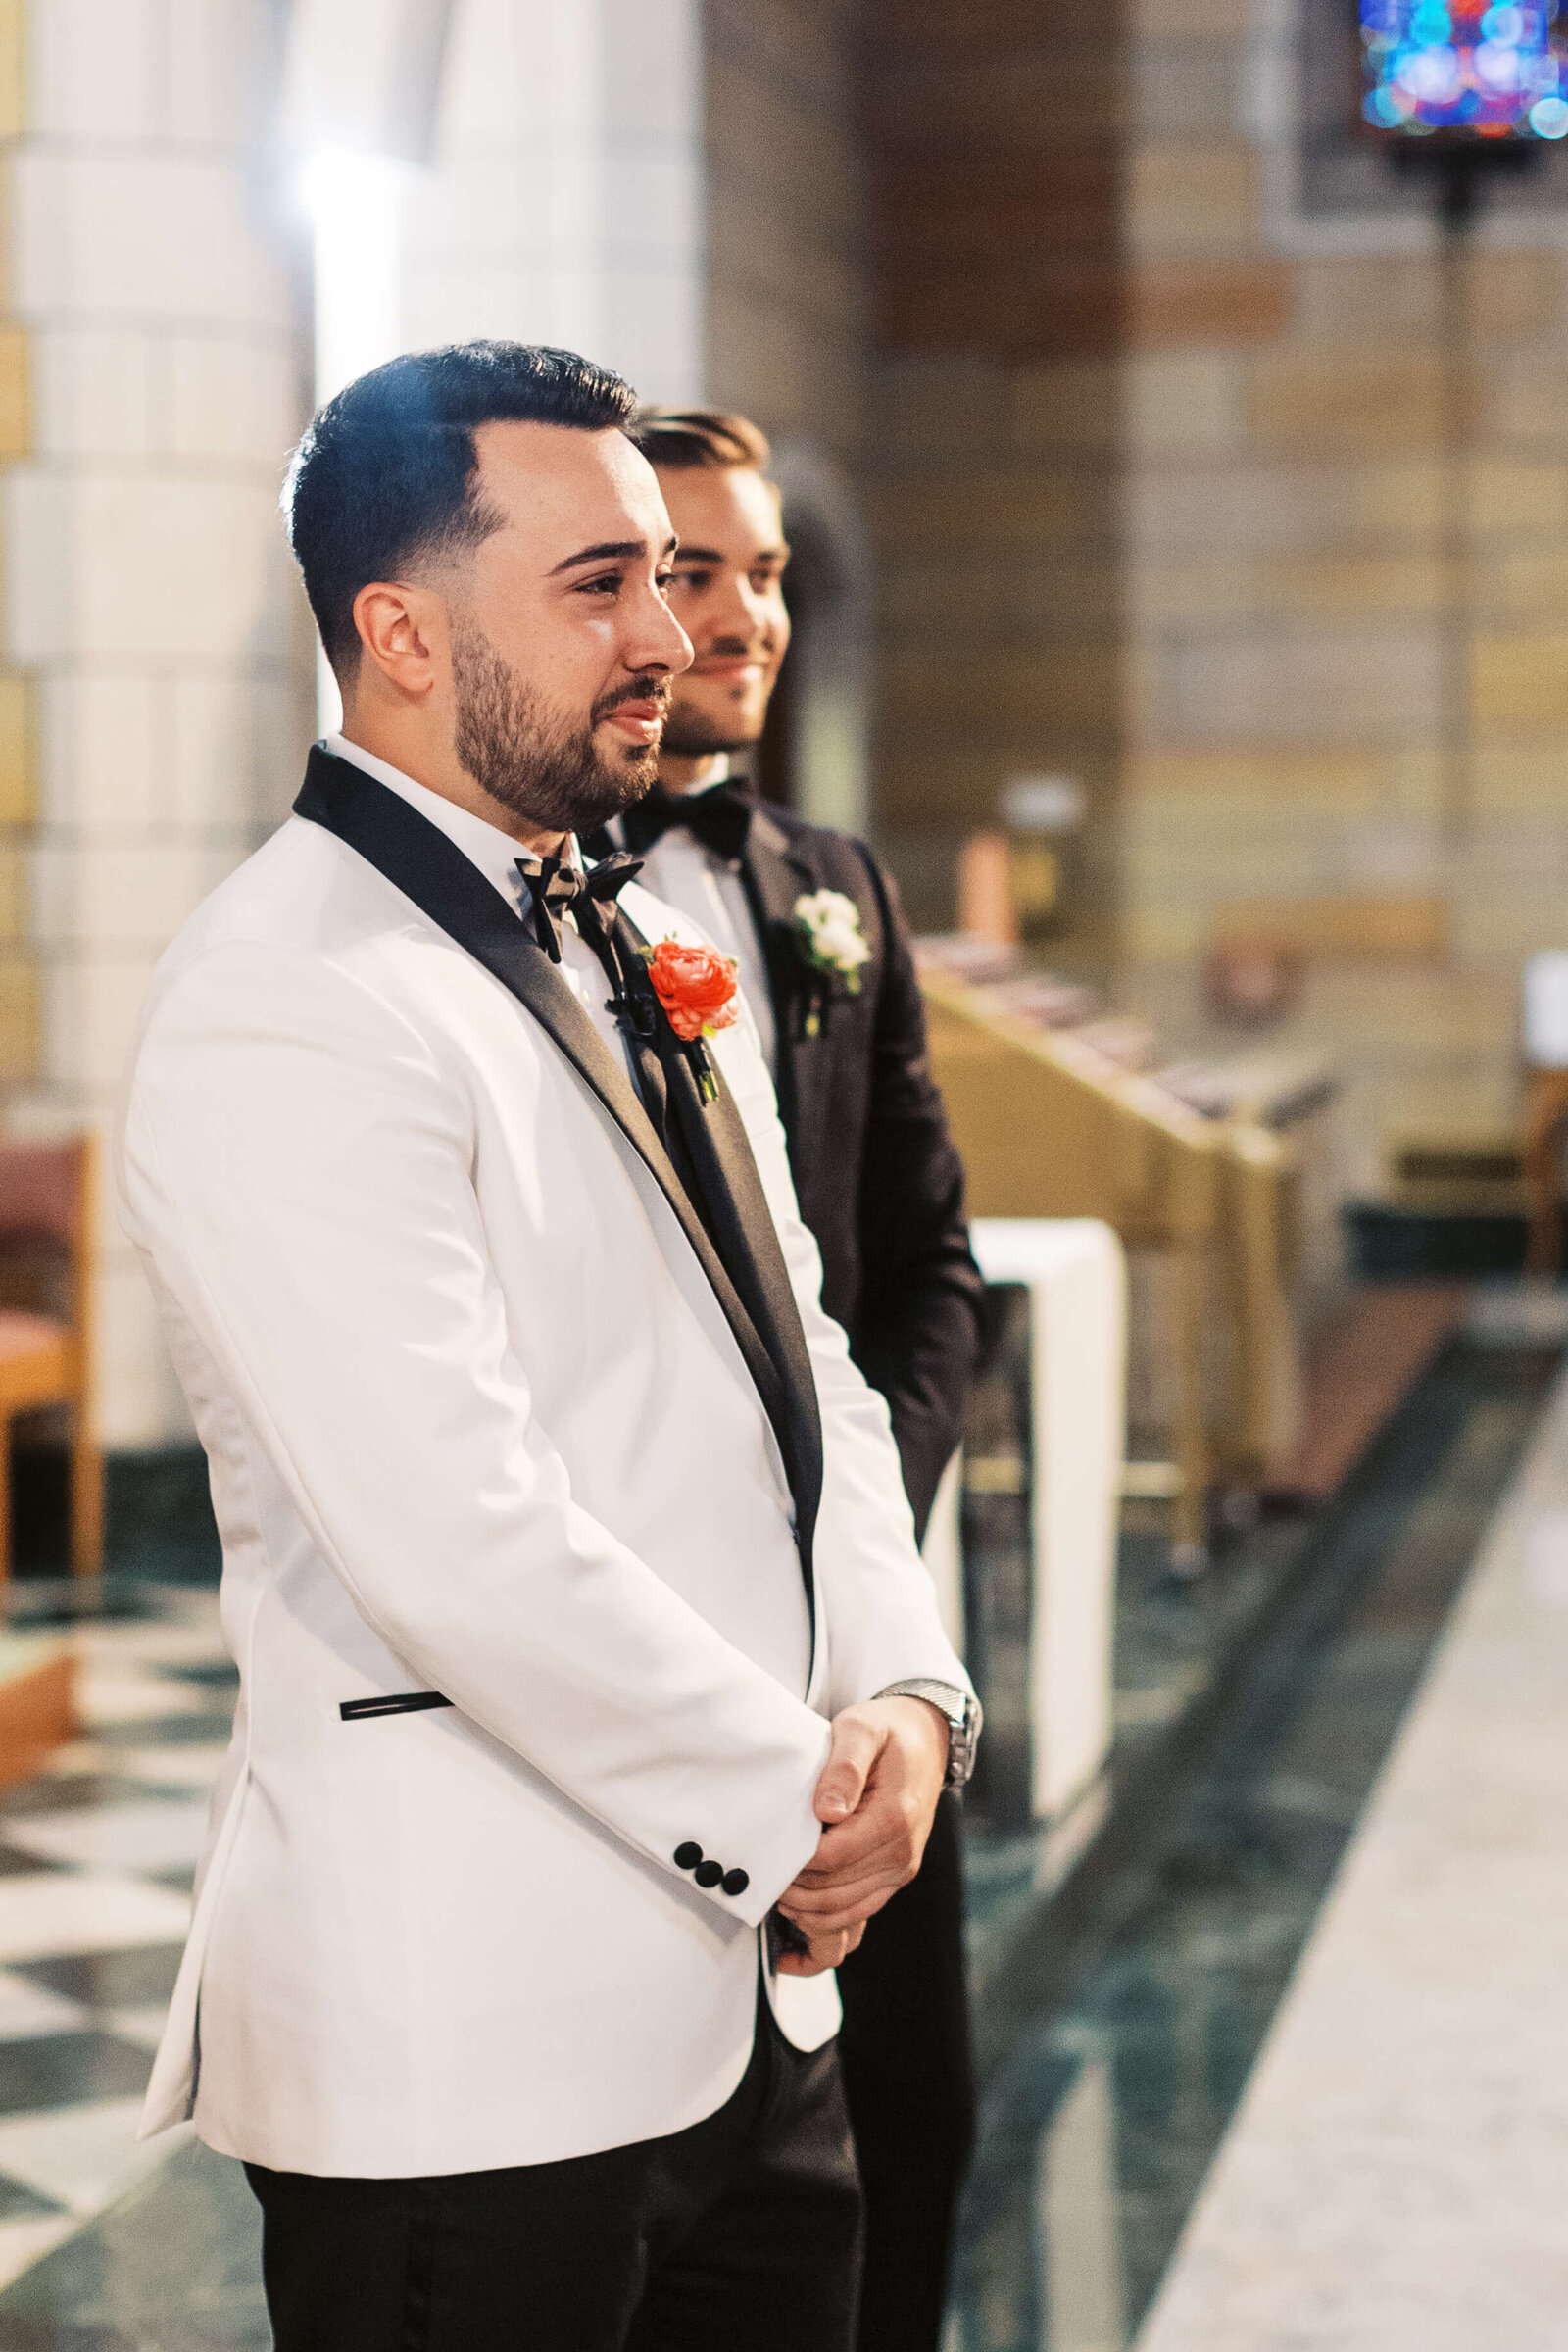 Groom becomes emotional as he watches his soon to be wife walk down the aisle.